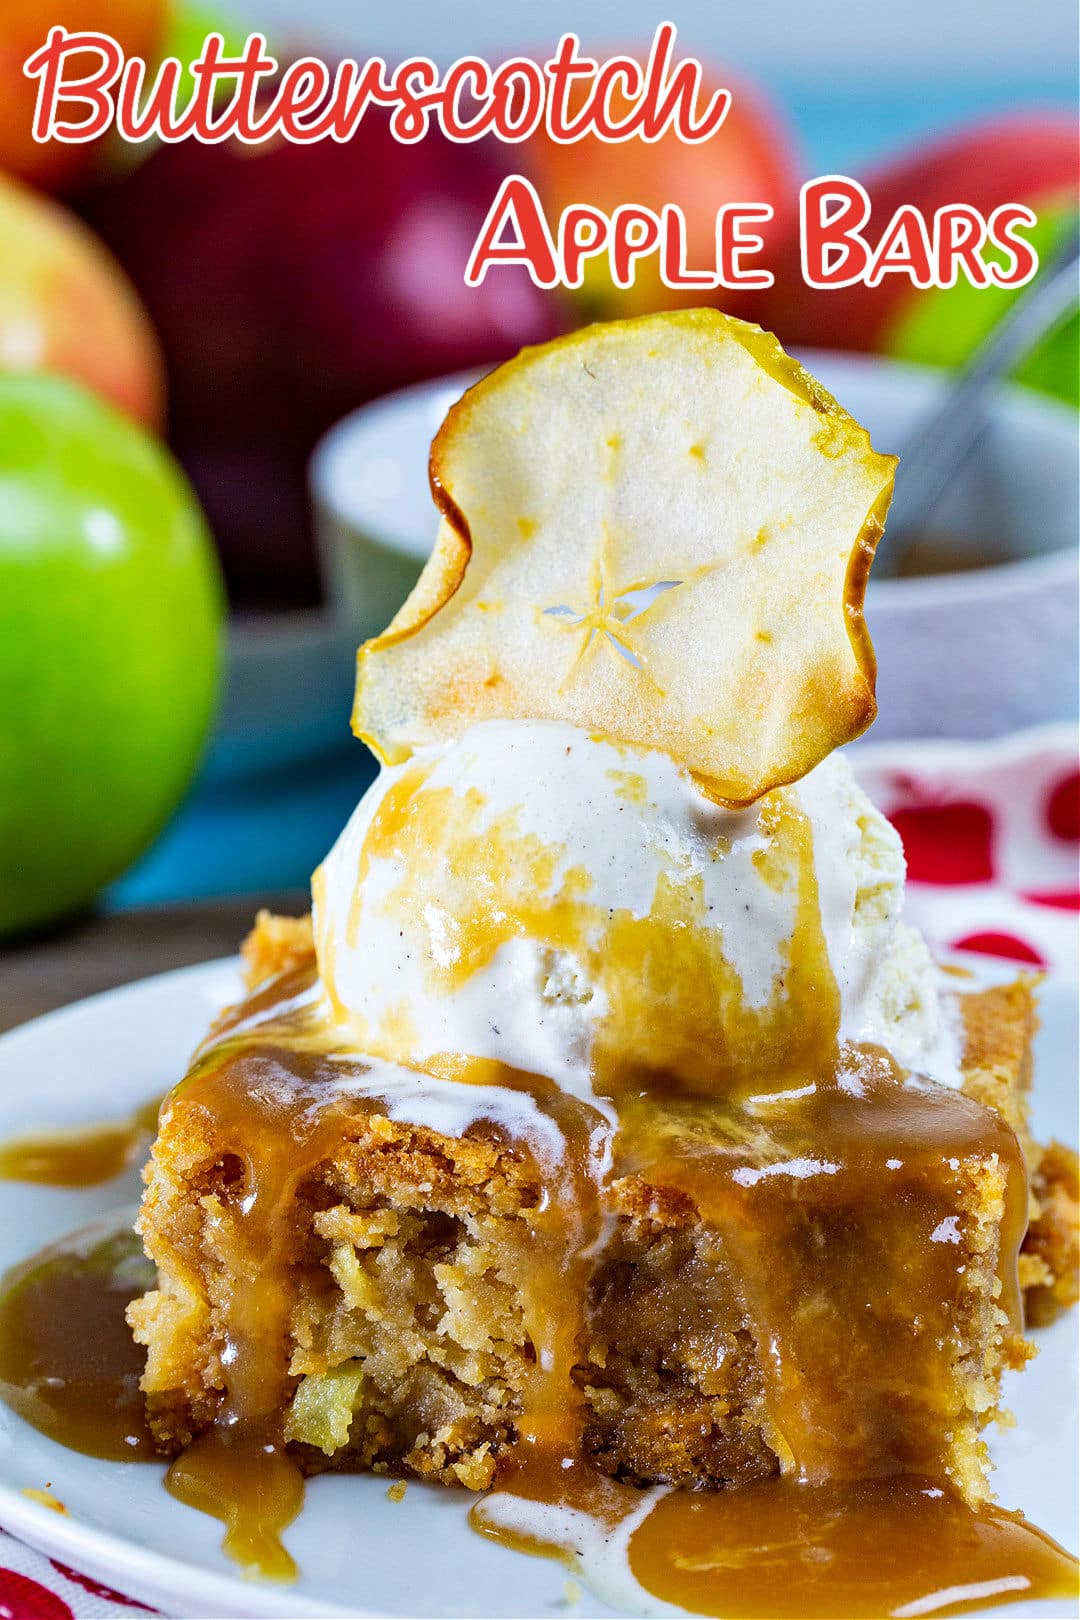 Butterscotch Apple Bars with Caramel Sauce topped with ice cream and an apple chip.